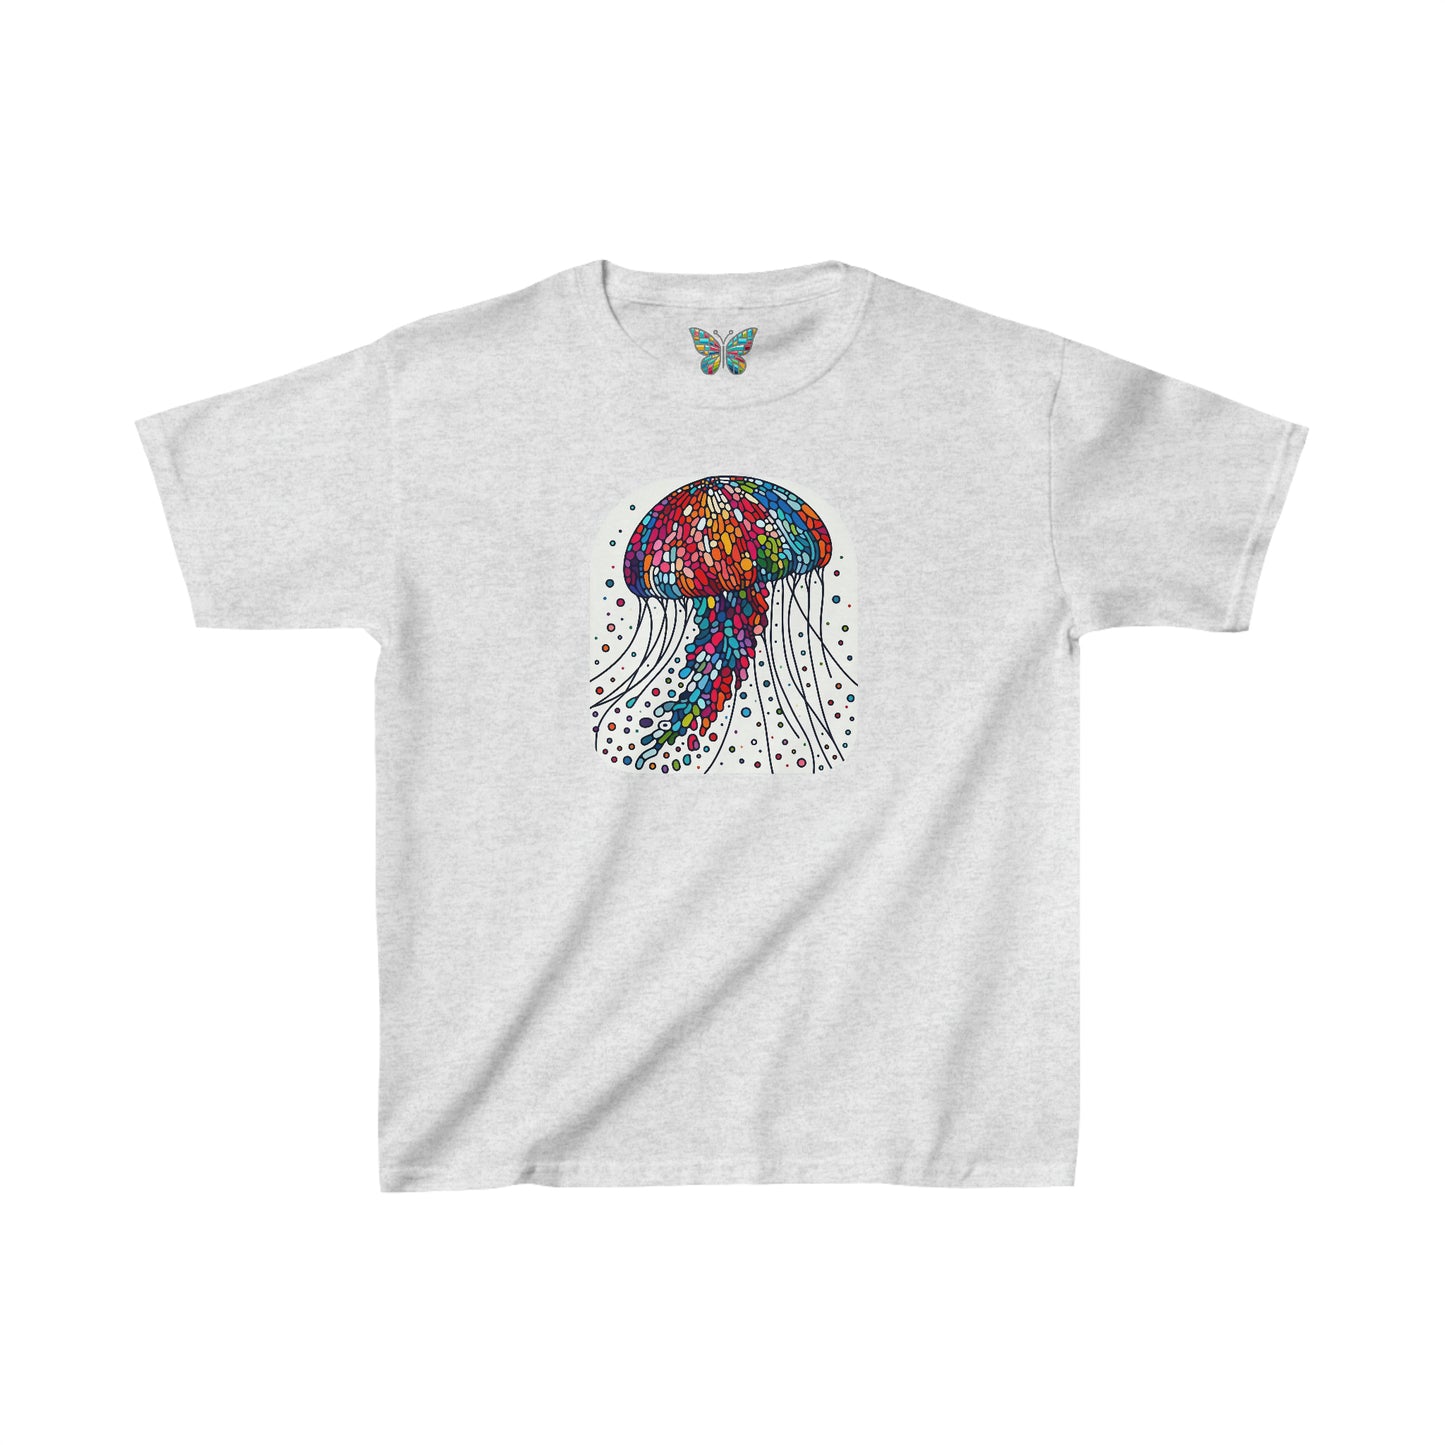 Jellyfish Dolcenea - Youth - Snazzle Tee